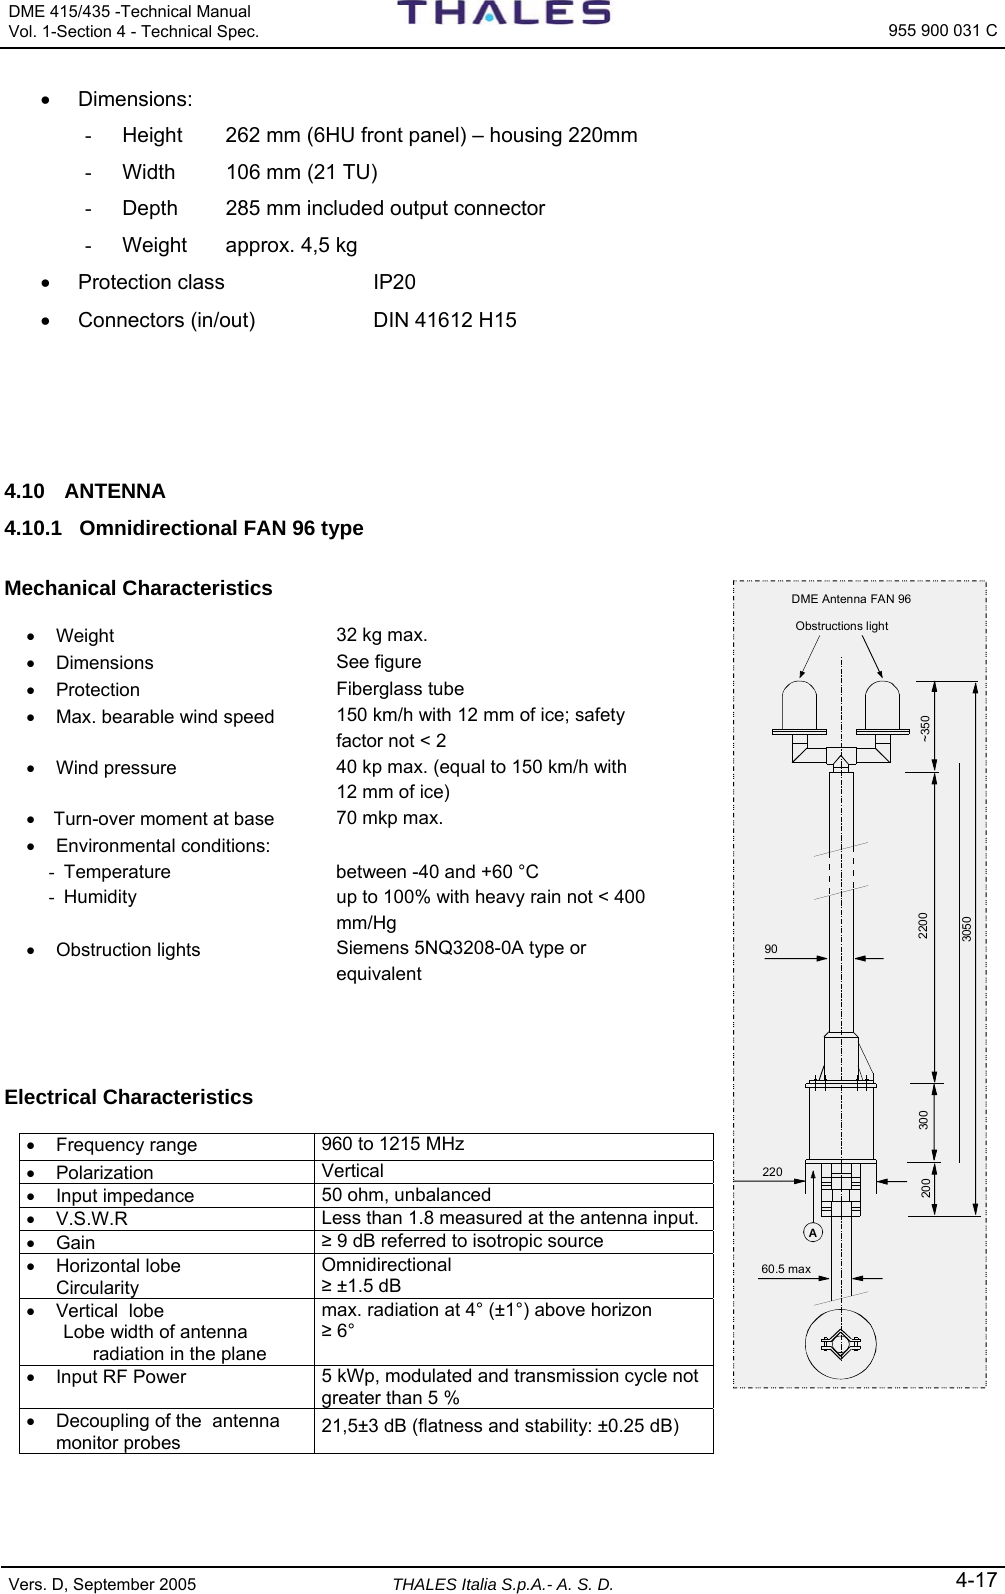 DME 415/435 -Technical Manual  Vol. 1-Section 4 - Technical Spec.   955 900 031 C Vers. D, September 2005 THALES Italia S.p.A.- A. S. D. 4-17 • Dimensions: -  Height  262 mm (6HU front panel) – housing 220mm -  Width  106 mm (21 TU) -  Depth  285 mm included output connector -  Weight  approx. 4,5 kg • Protection class  IP20 •  Connectors (in/out)  DIN 41612 H15    4.10 ANTENNA 4.10.1  Omnidirectional FAN 96 type  Mechanical Characteristics  • Weight  32 kg max. • Dimensions  See figure • Protection  Fiberglass tube •  Max. bearable wind speed  150 km/h with 12 mm of ice; safety factor not &lt; 2 • Wind pressure  40 kp max. (equal to 150 km/h with 12 mm of ice) •   Turn-over moment at base  70 mkp max. • Environmental conditions:   -  Temperature  between -40 and +60 °C -  Humidity  up to 100% with heavy rain not &lt; 400 mm/Hg • Obstruction lights  Siemens 5NQ3208-0A type or equivalent     Electrical Characteristics  • Frequency range  960 to 1215 MHz • Polarization  Vertical • Input impedance  50 ohm, unbalanced • V.S.W.R  Less than 1.8 measured at the antenna input. • Gain  ≥ 9 dB referred to isotropic source •  Horizontal lobe   Circularity Omnidirectional ≥ ±1.5 dB •  Vertical  lobe    Lobe width of antenna     radiation in the plane max. radiation at 4° (±1°) above horizon ≥ 6° •  Input RF Power  5 kWp, modulated and transmission cycle not greater than 5 % •  Decoupling of the  antenna monitor probes  21,5±3 dB (flatness and stability: ±0.25 dB)    Obstructions light~350220030020022060.5 max90A3050DME Antenna FAN 96